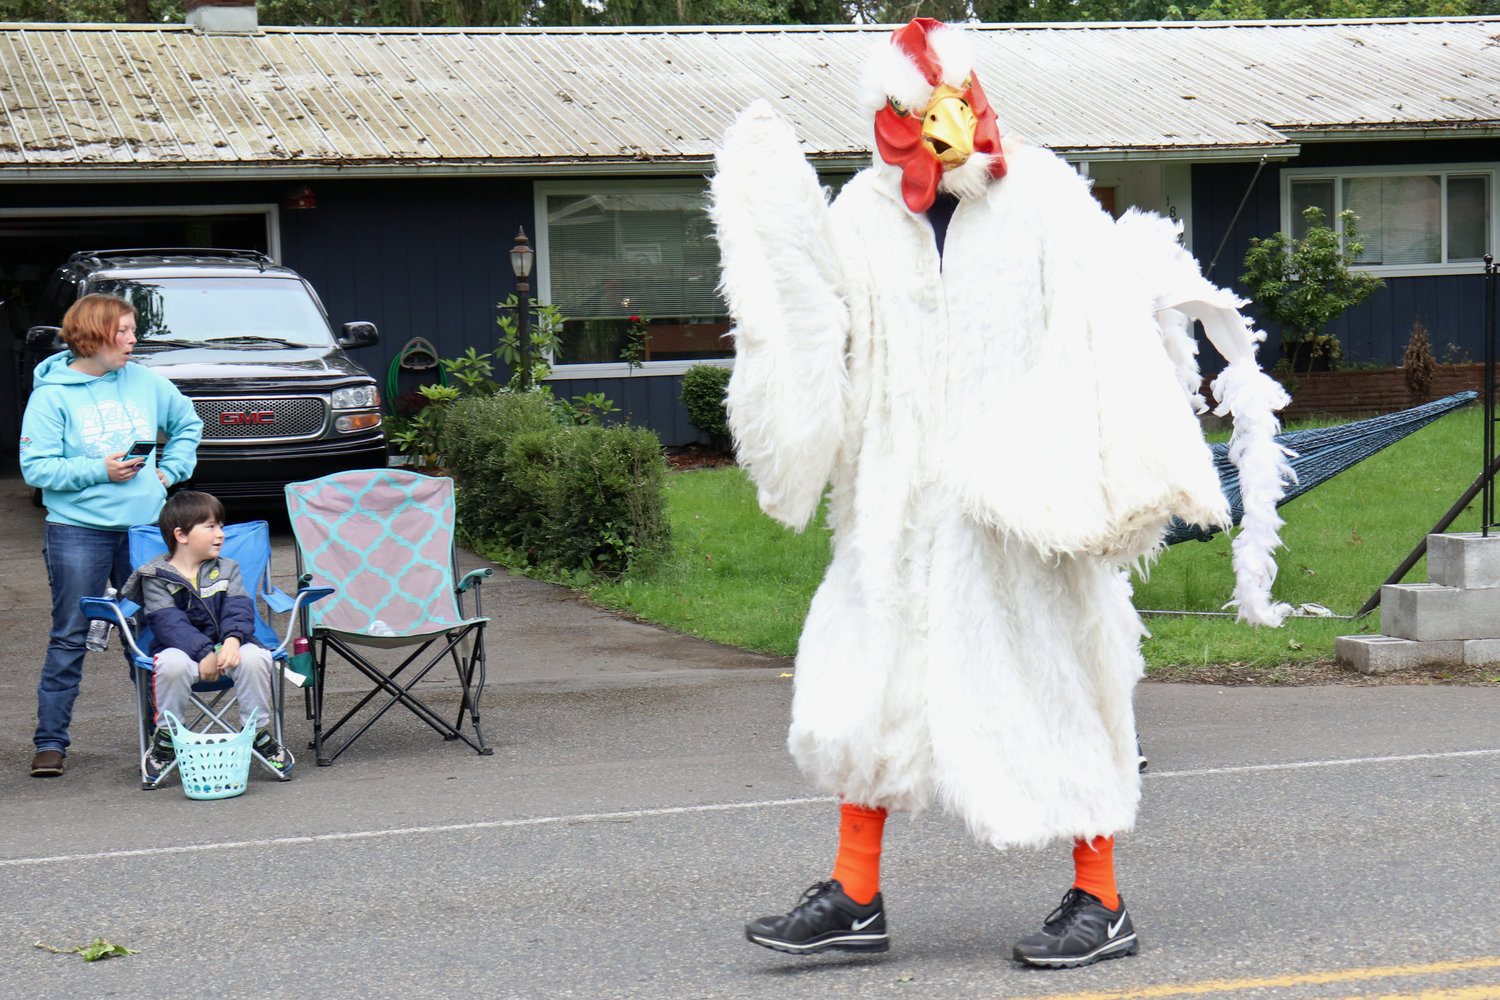 A chicken promoting Independence Valley Community Hall’s upcoming Chicken Races event strikes a pose during the Swede Day Parade in Rochester on Saturday.